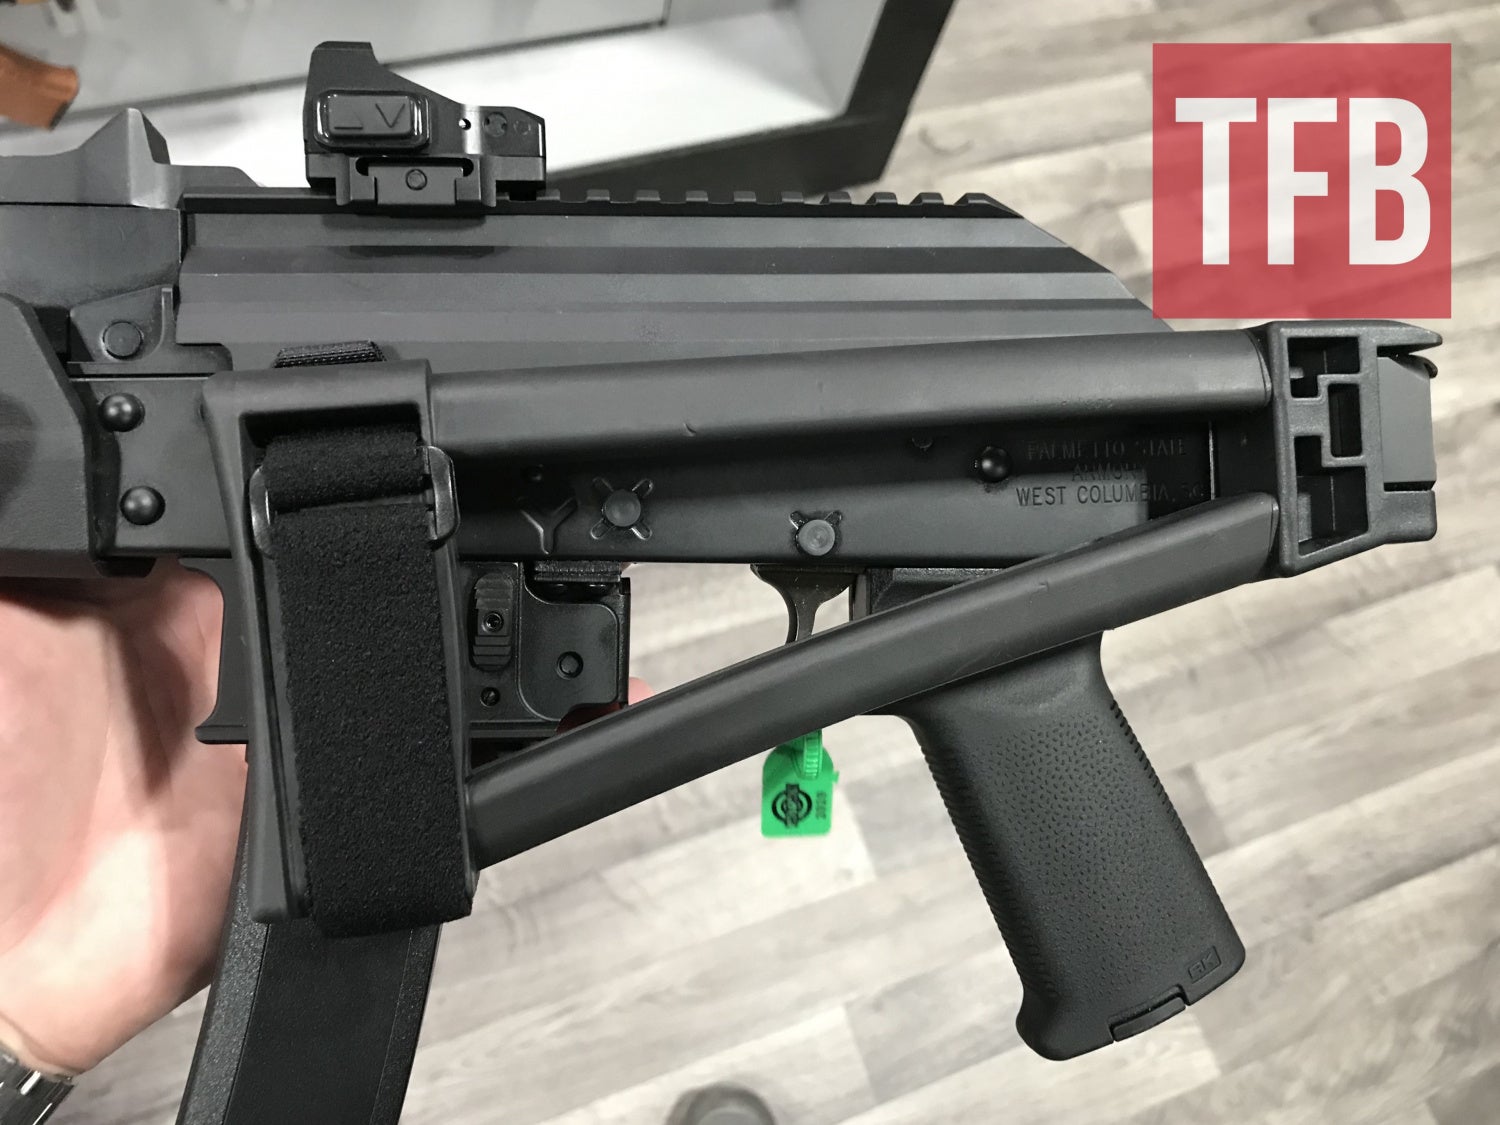 popularity of AK pistols and 9mm AKs, SB Tactical has announced they will b...